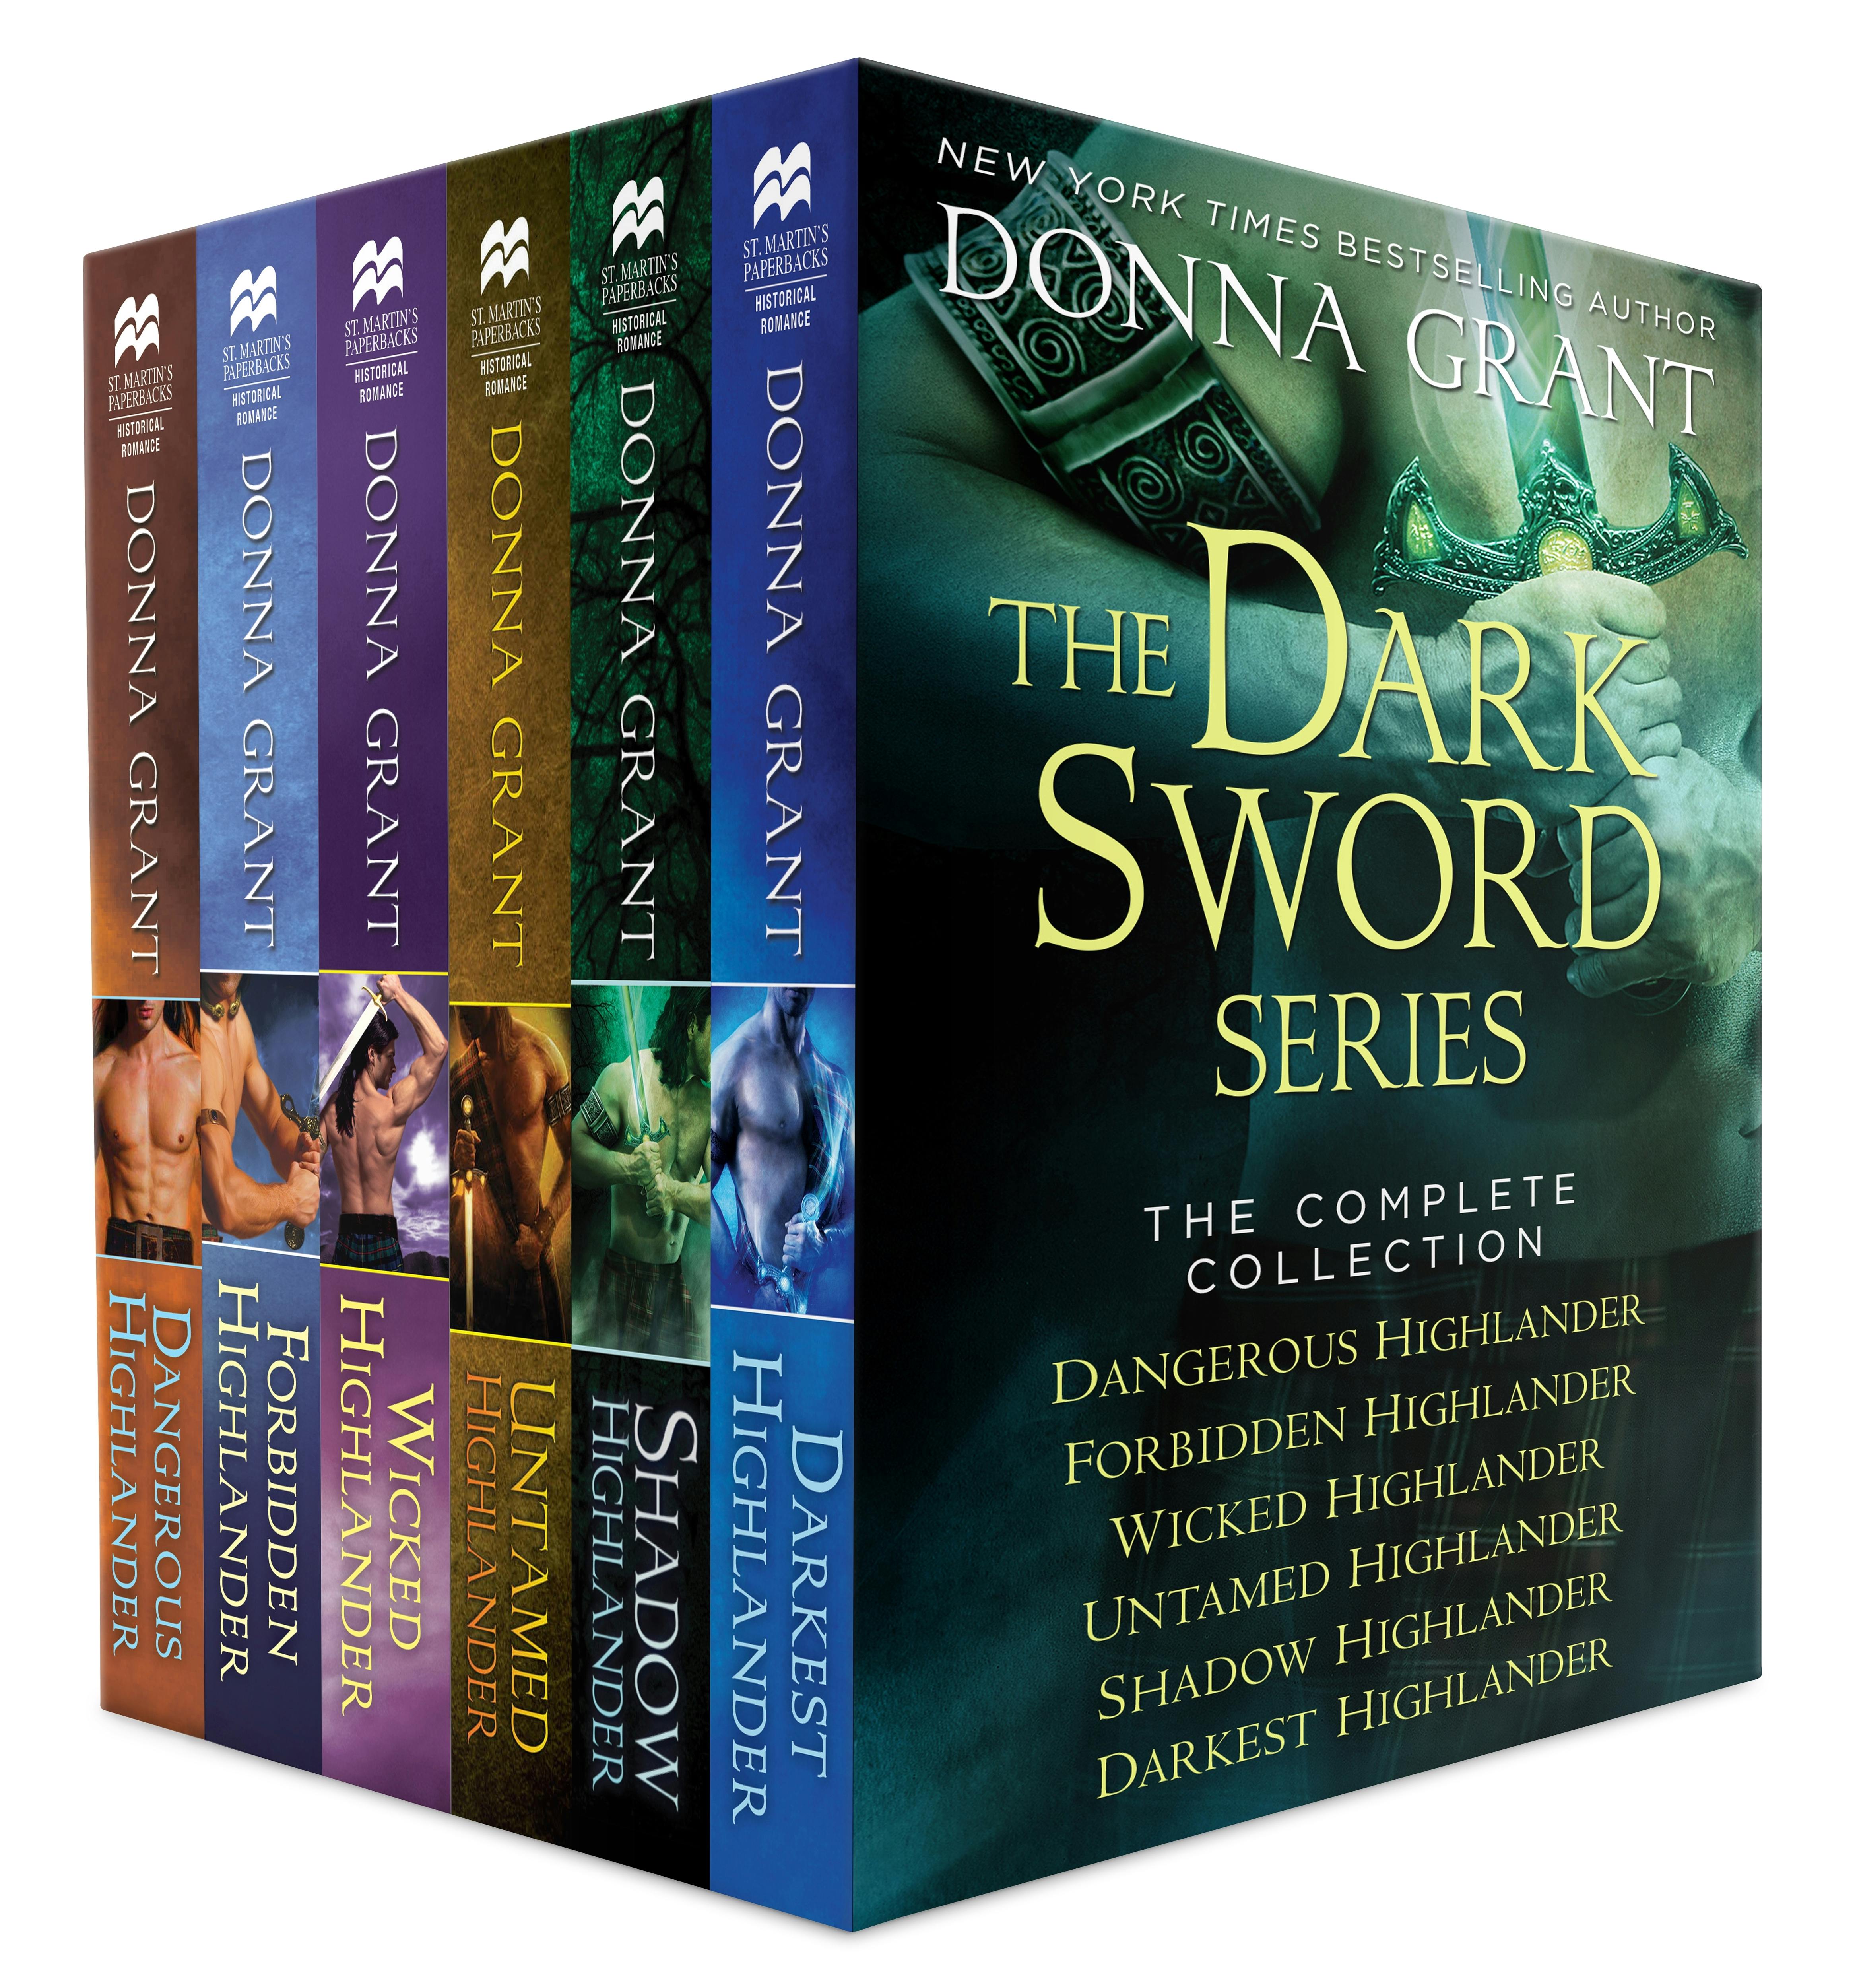 The Dark Sword Series, The Complete Collection